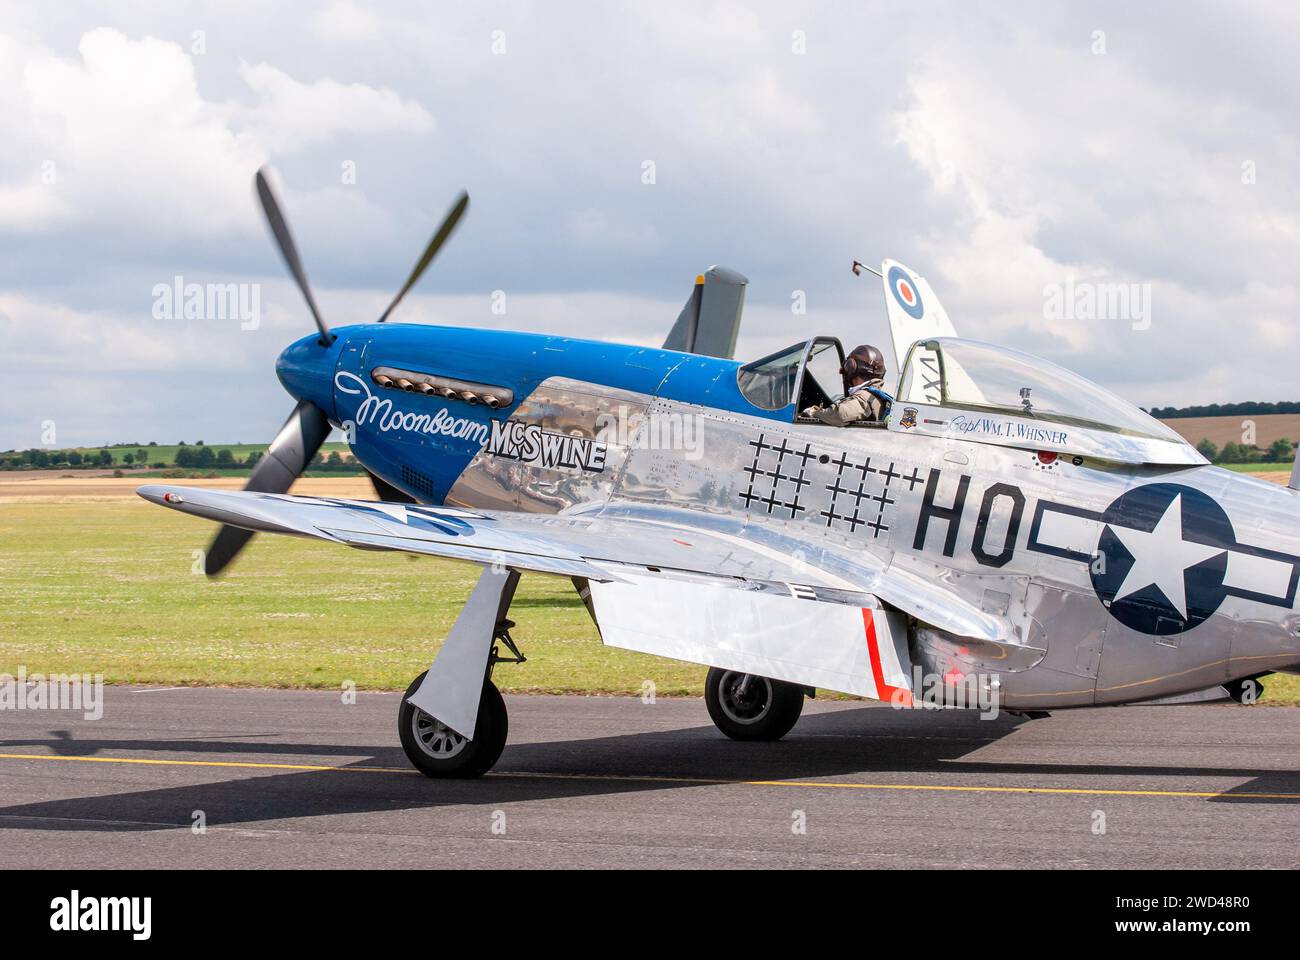 P51 mustang warbird fighter plane from WW2  ‘Moonbeam McSwine' Tail number 414237 at Duxford airshow in the United Kingdom Stock Photo